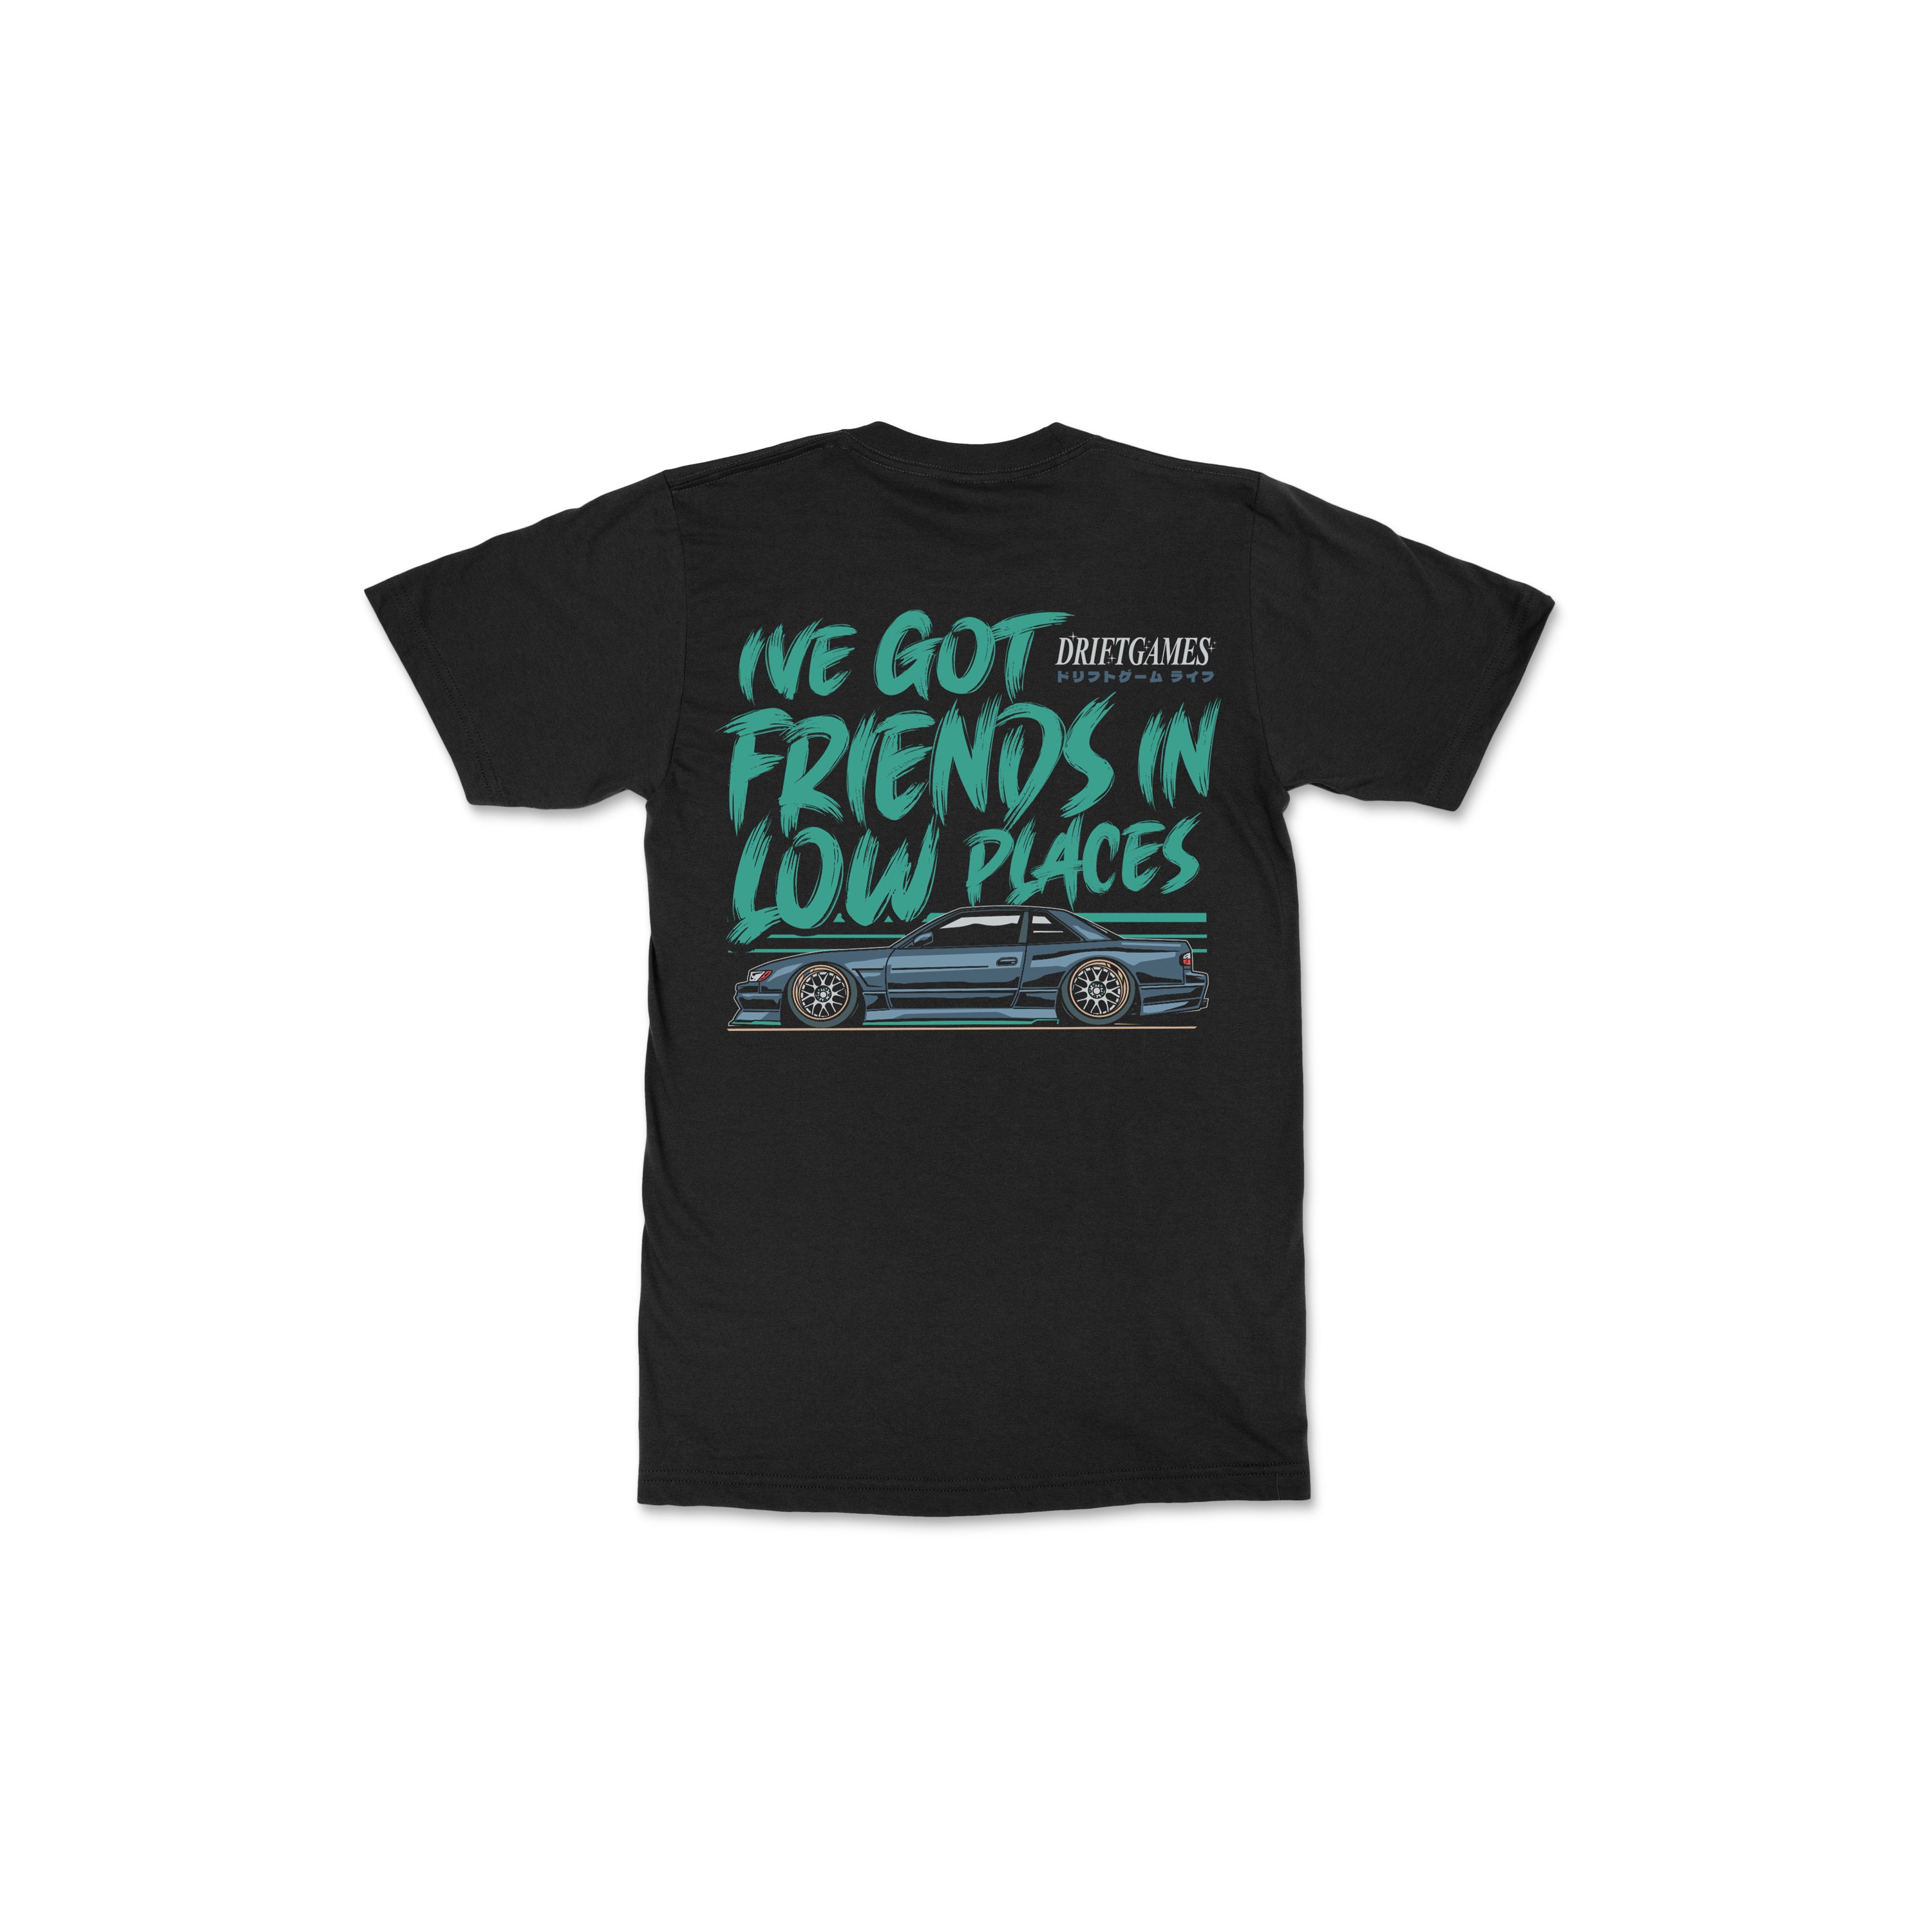 Kids Friends in Low Places Tee